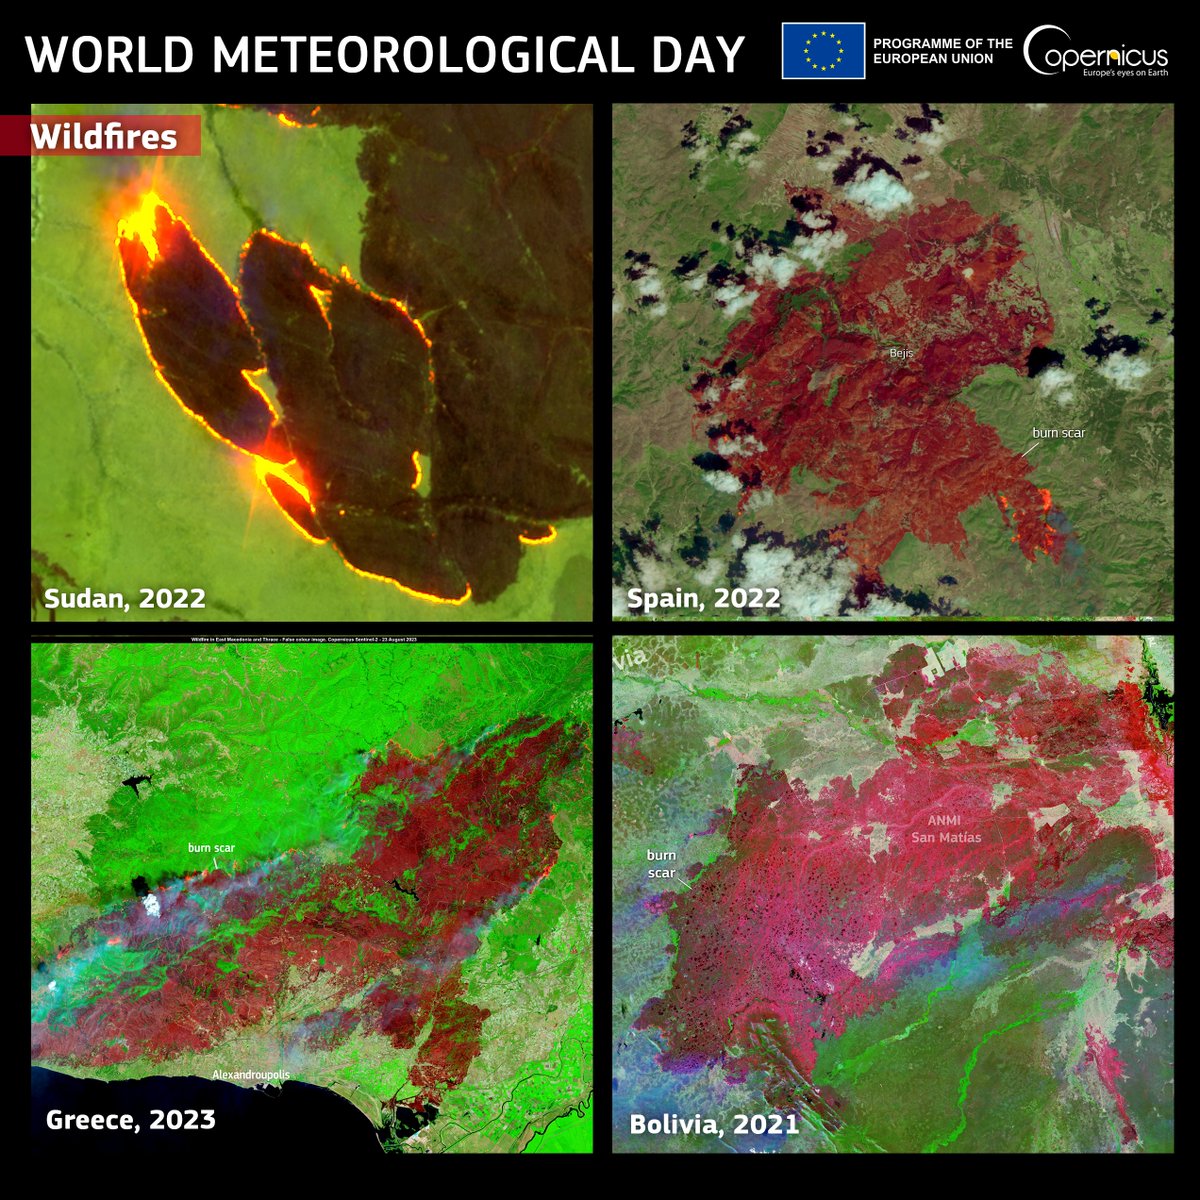 #WorldMeteorologicalDay 6/6 #Copernicus 🇪🇺🛰️ supports early warning systems and provides information on the extent and severity of #wildfires This helps to mitigate their impact on communities and #ecosystems around the world.